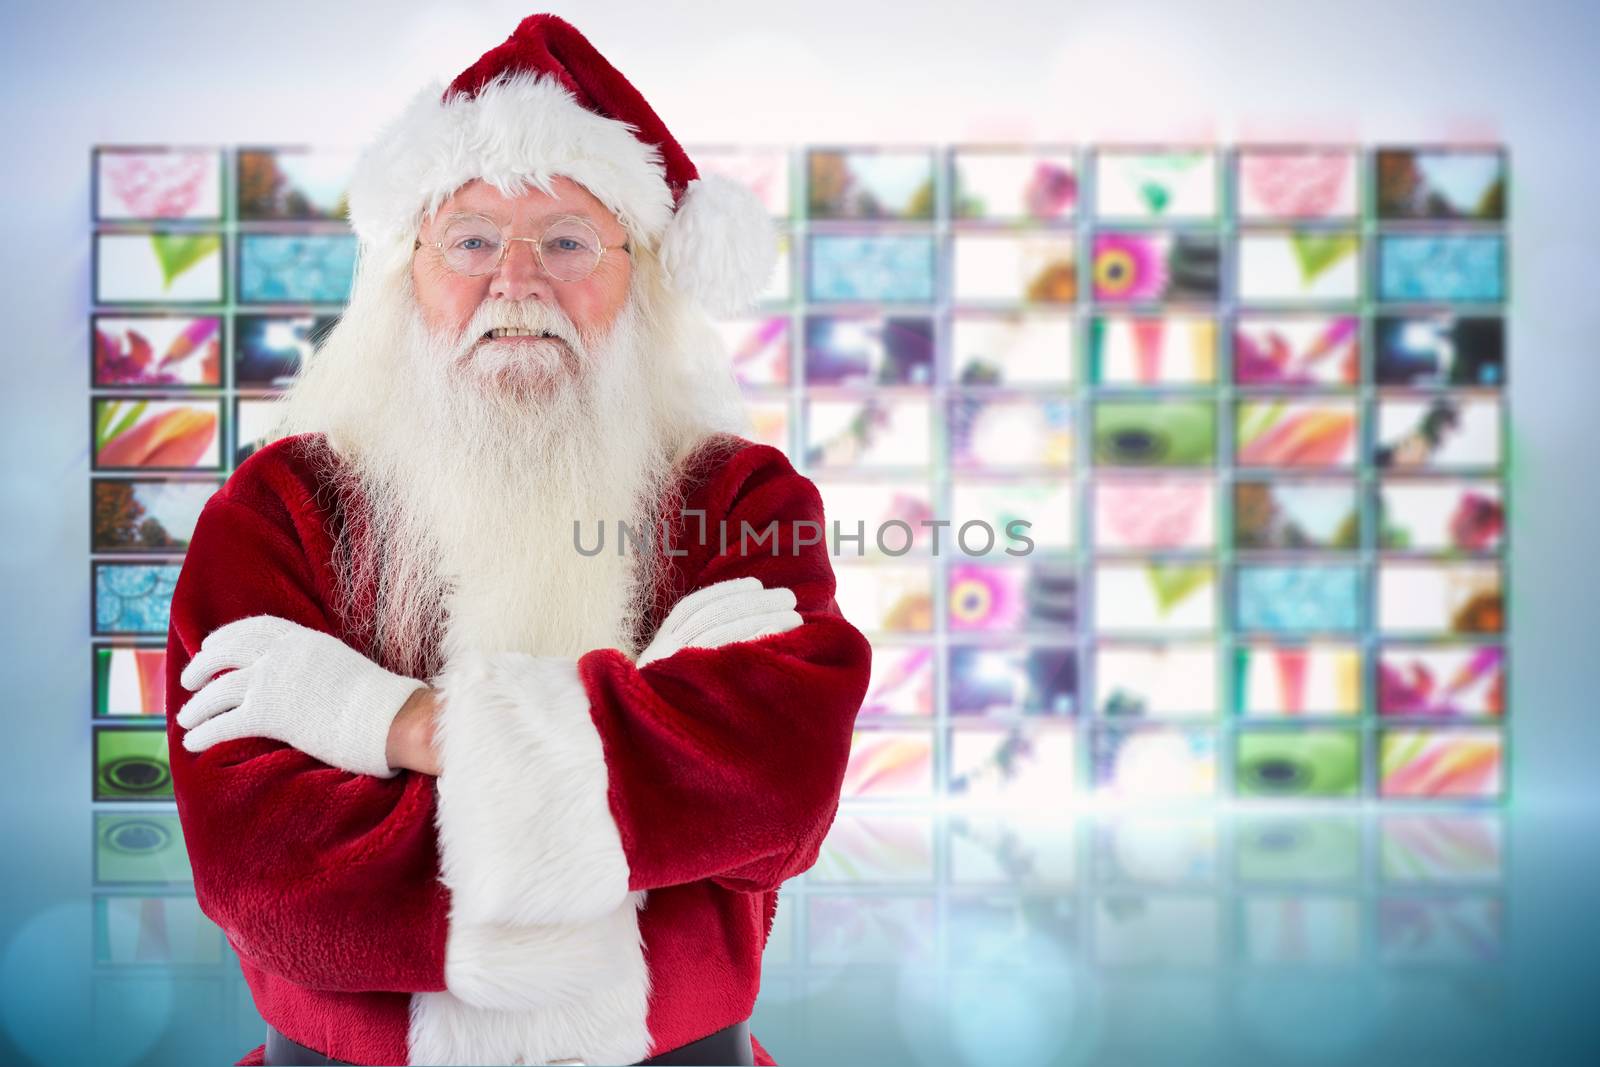 Santa smiles with folded arms against screen collage showing lifestyle images